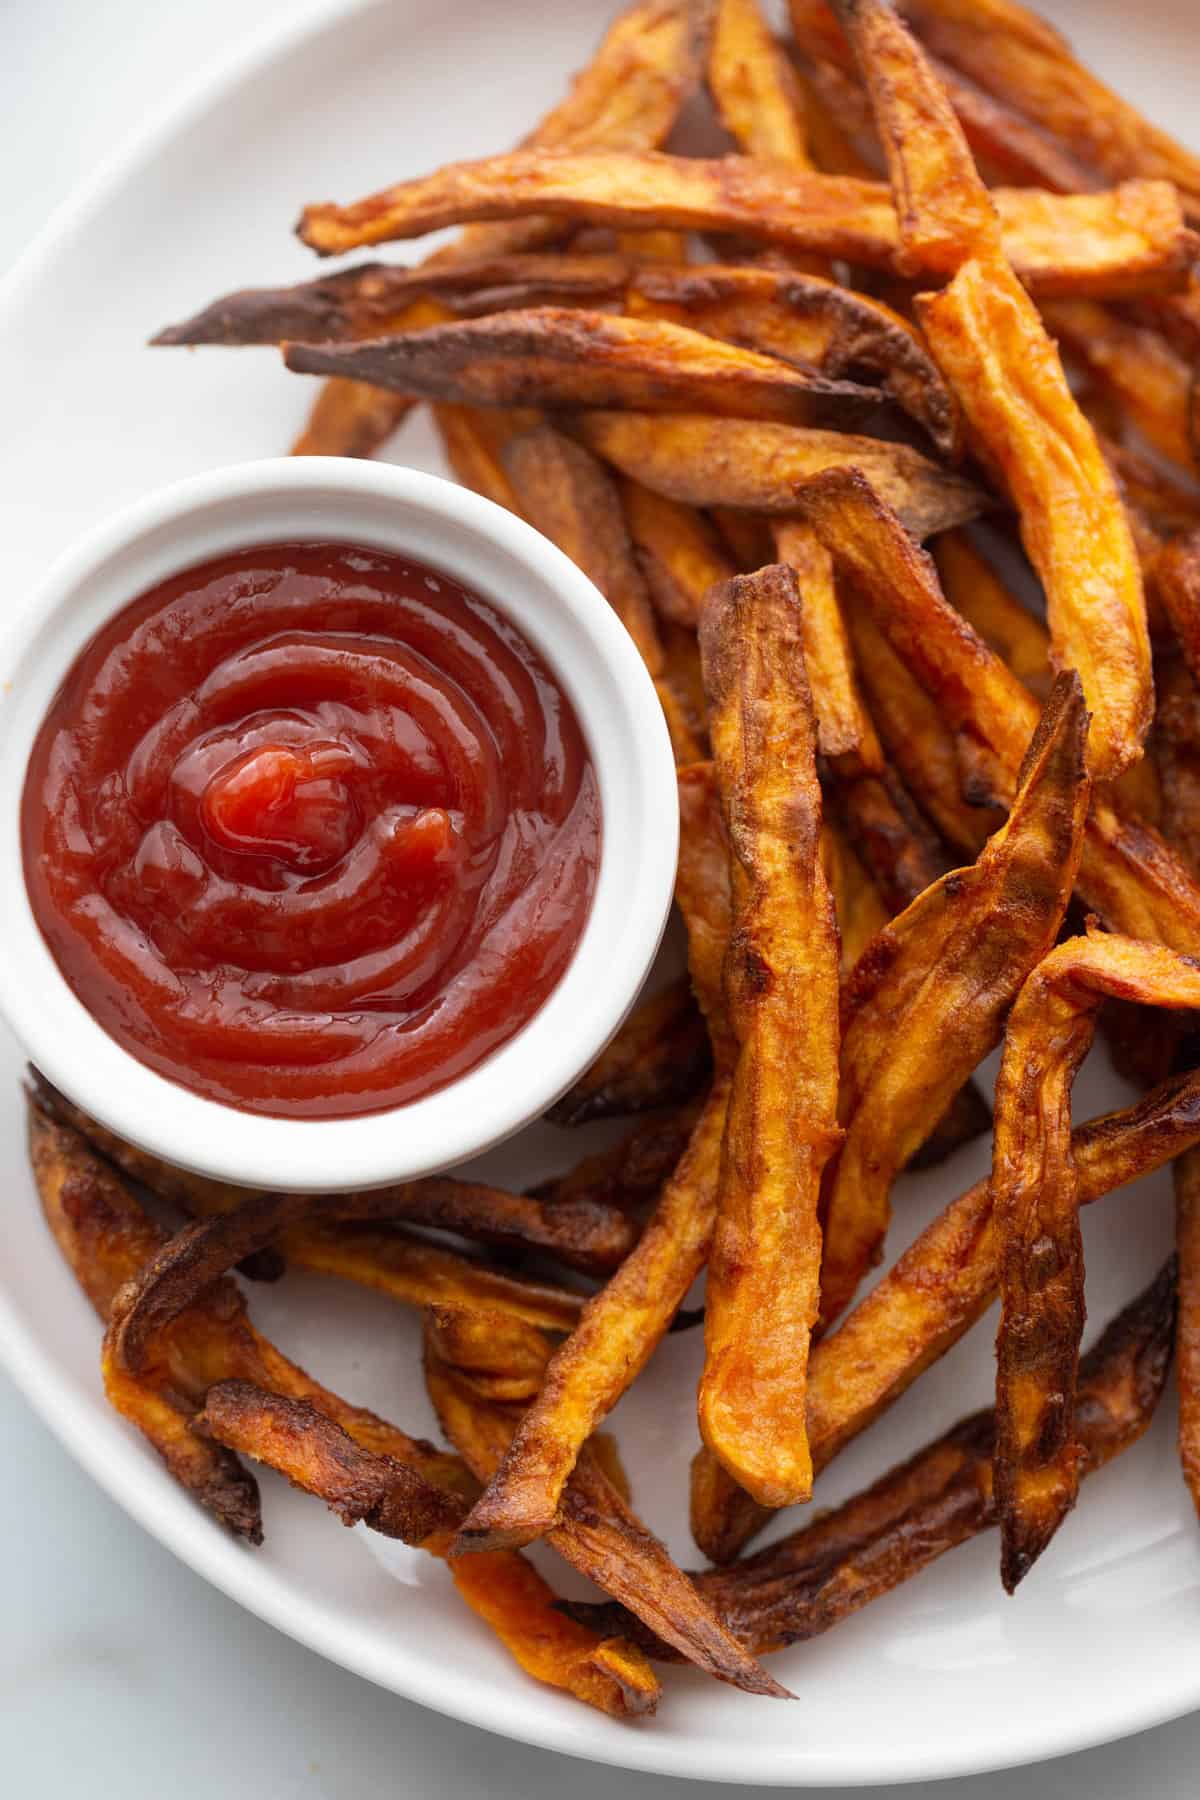 Homemade sweet potato fries on a white plate with a side of ketchup.